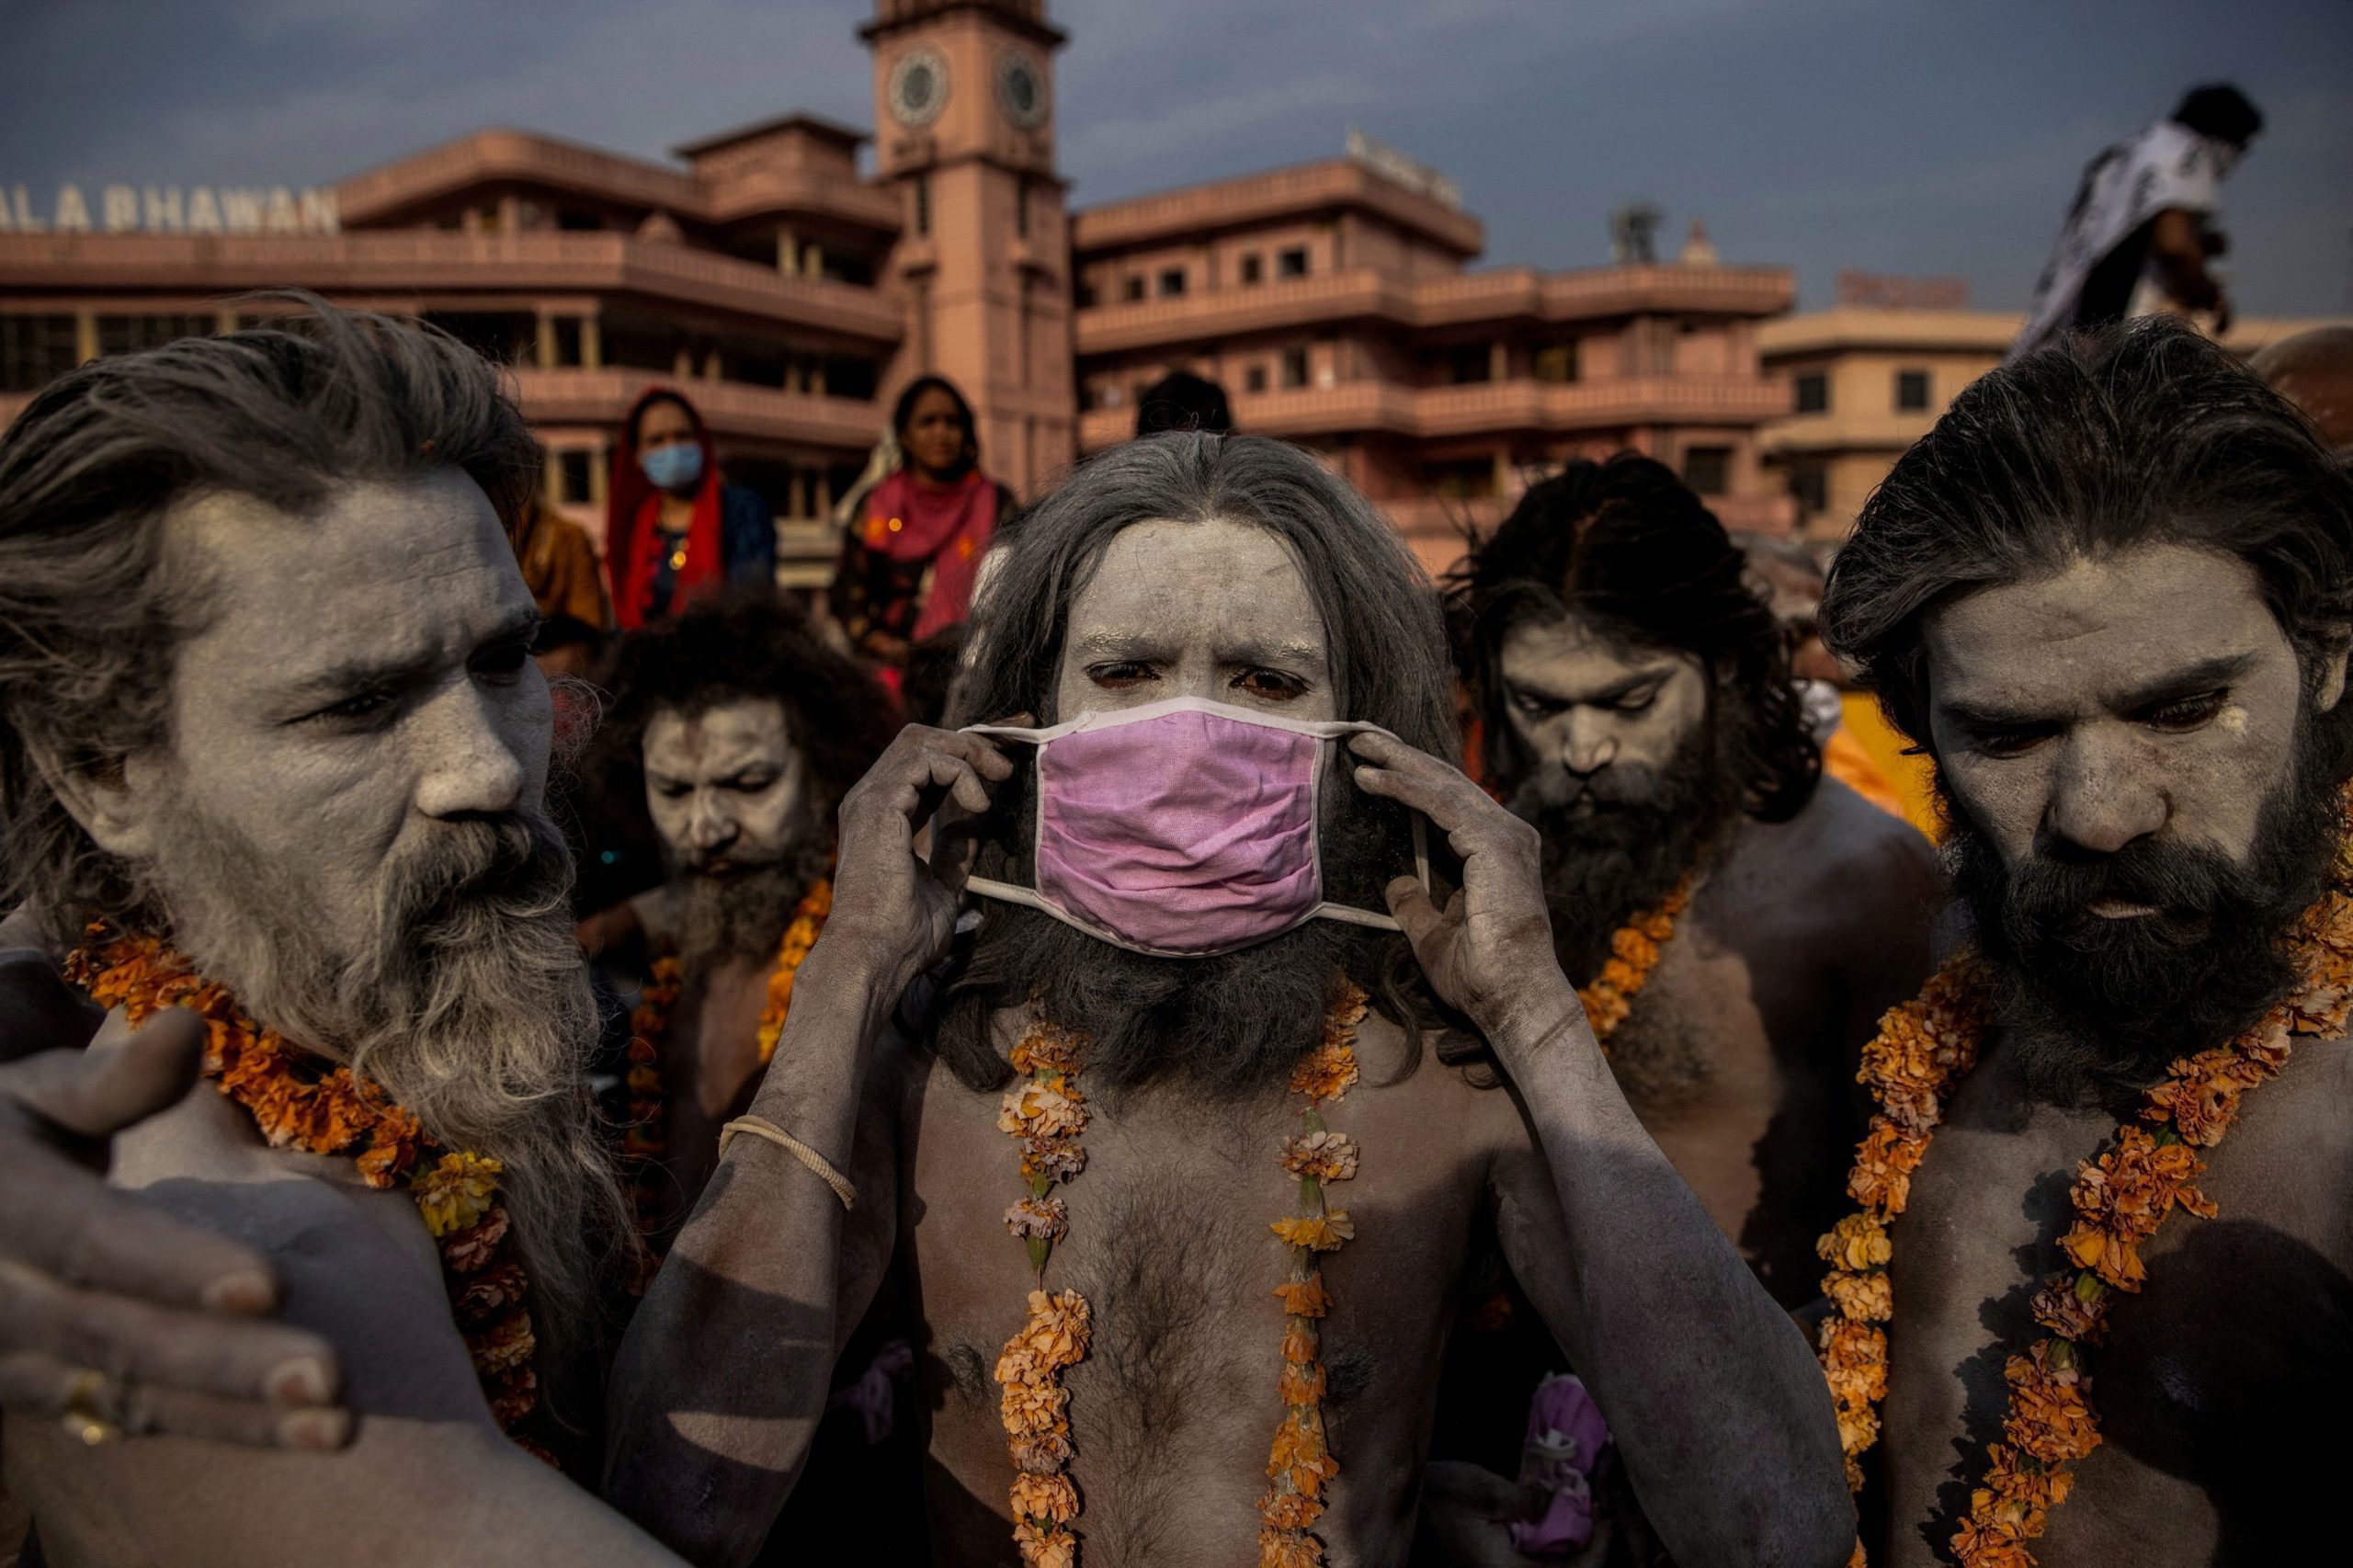 A 'Naga Sadhu,' or Hindu holy man, places a mask across his face before entering the Ganges river during the traditional Shahi Snan, or royal dip, at the Kumbh Mela festival in Haridwar, India, April 12, 2021. As COVID-19 cases and deaths exploded in India in April and May, hospitals ran so short of oxygen that many patients suffocated. REUTERS/Danish Siddiqui